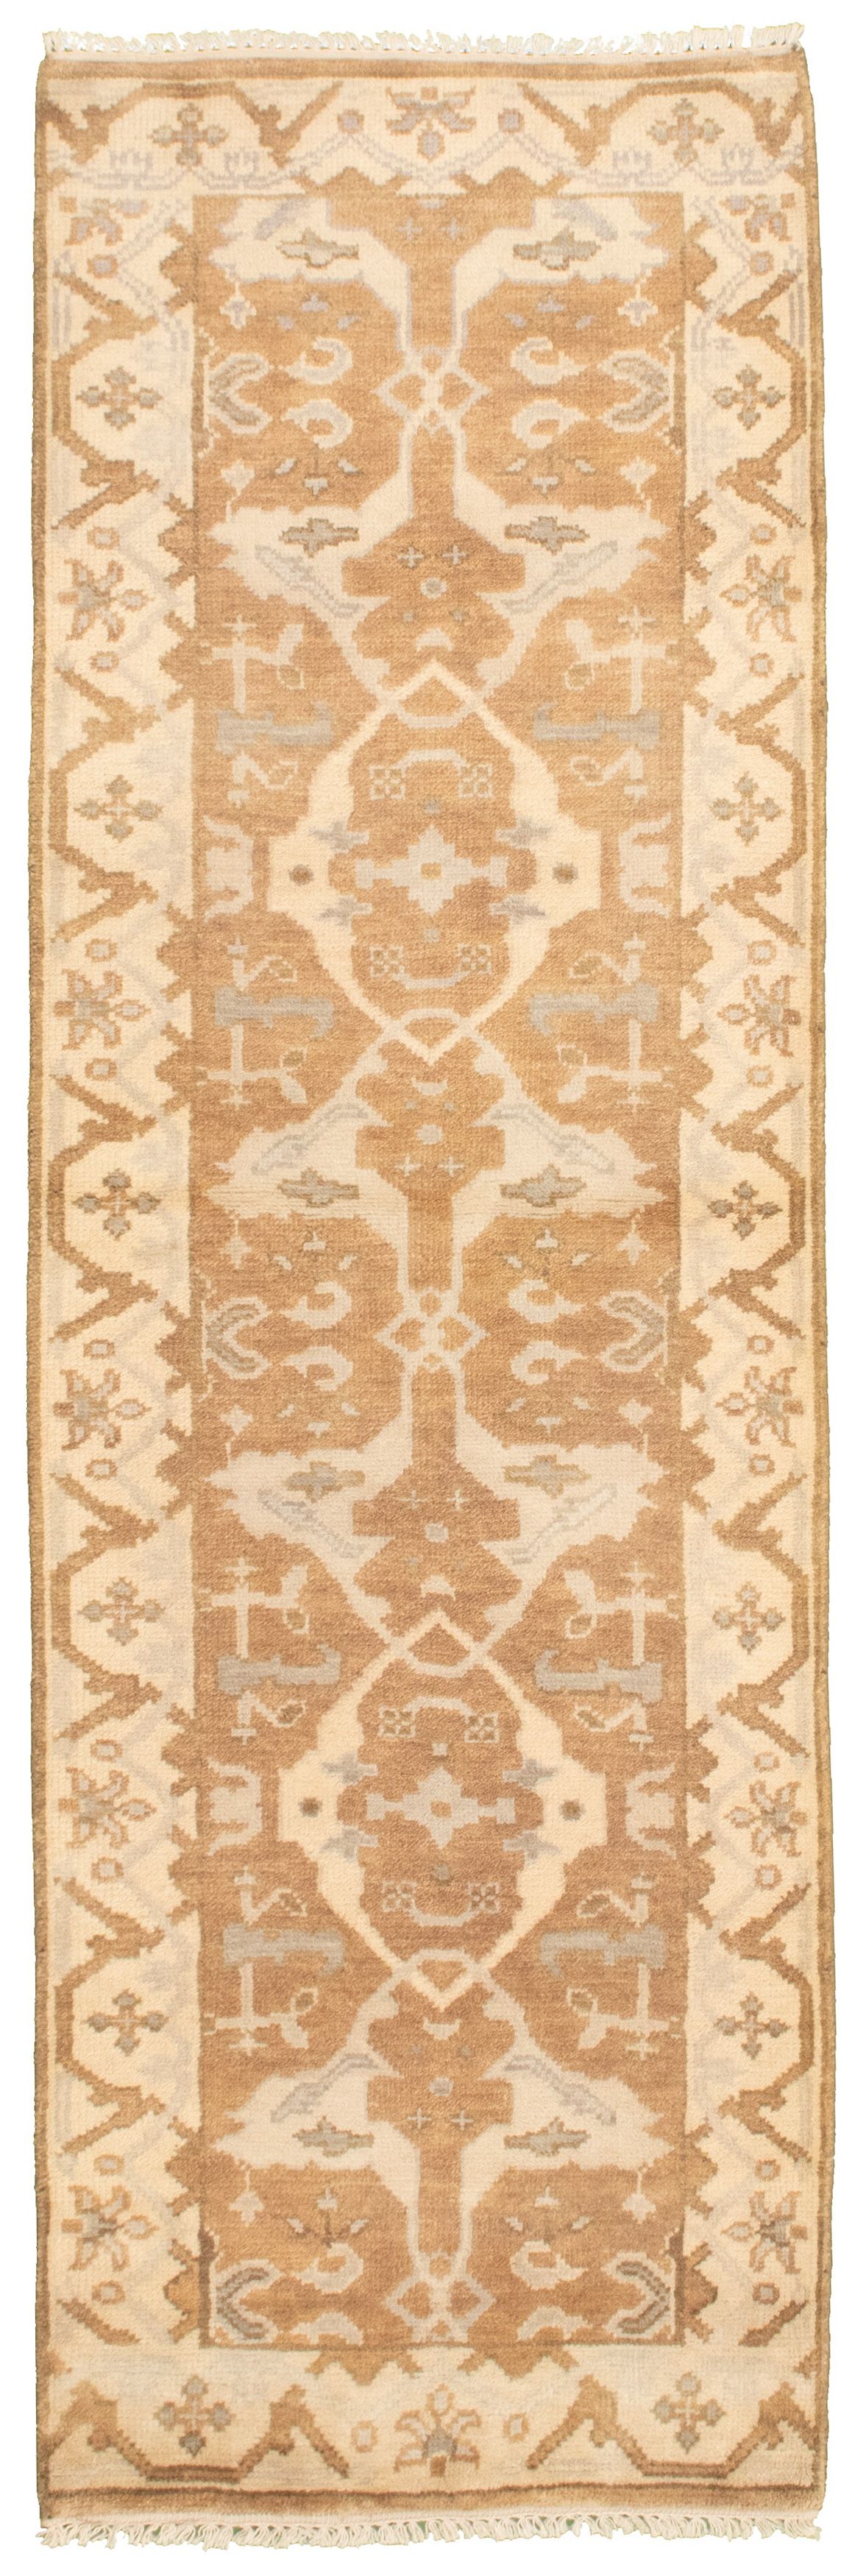 Hand-knotted Royal Ushak Tan Wool Rug 2'7" x 8'1" Size: 2'7" x 8'1"  